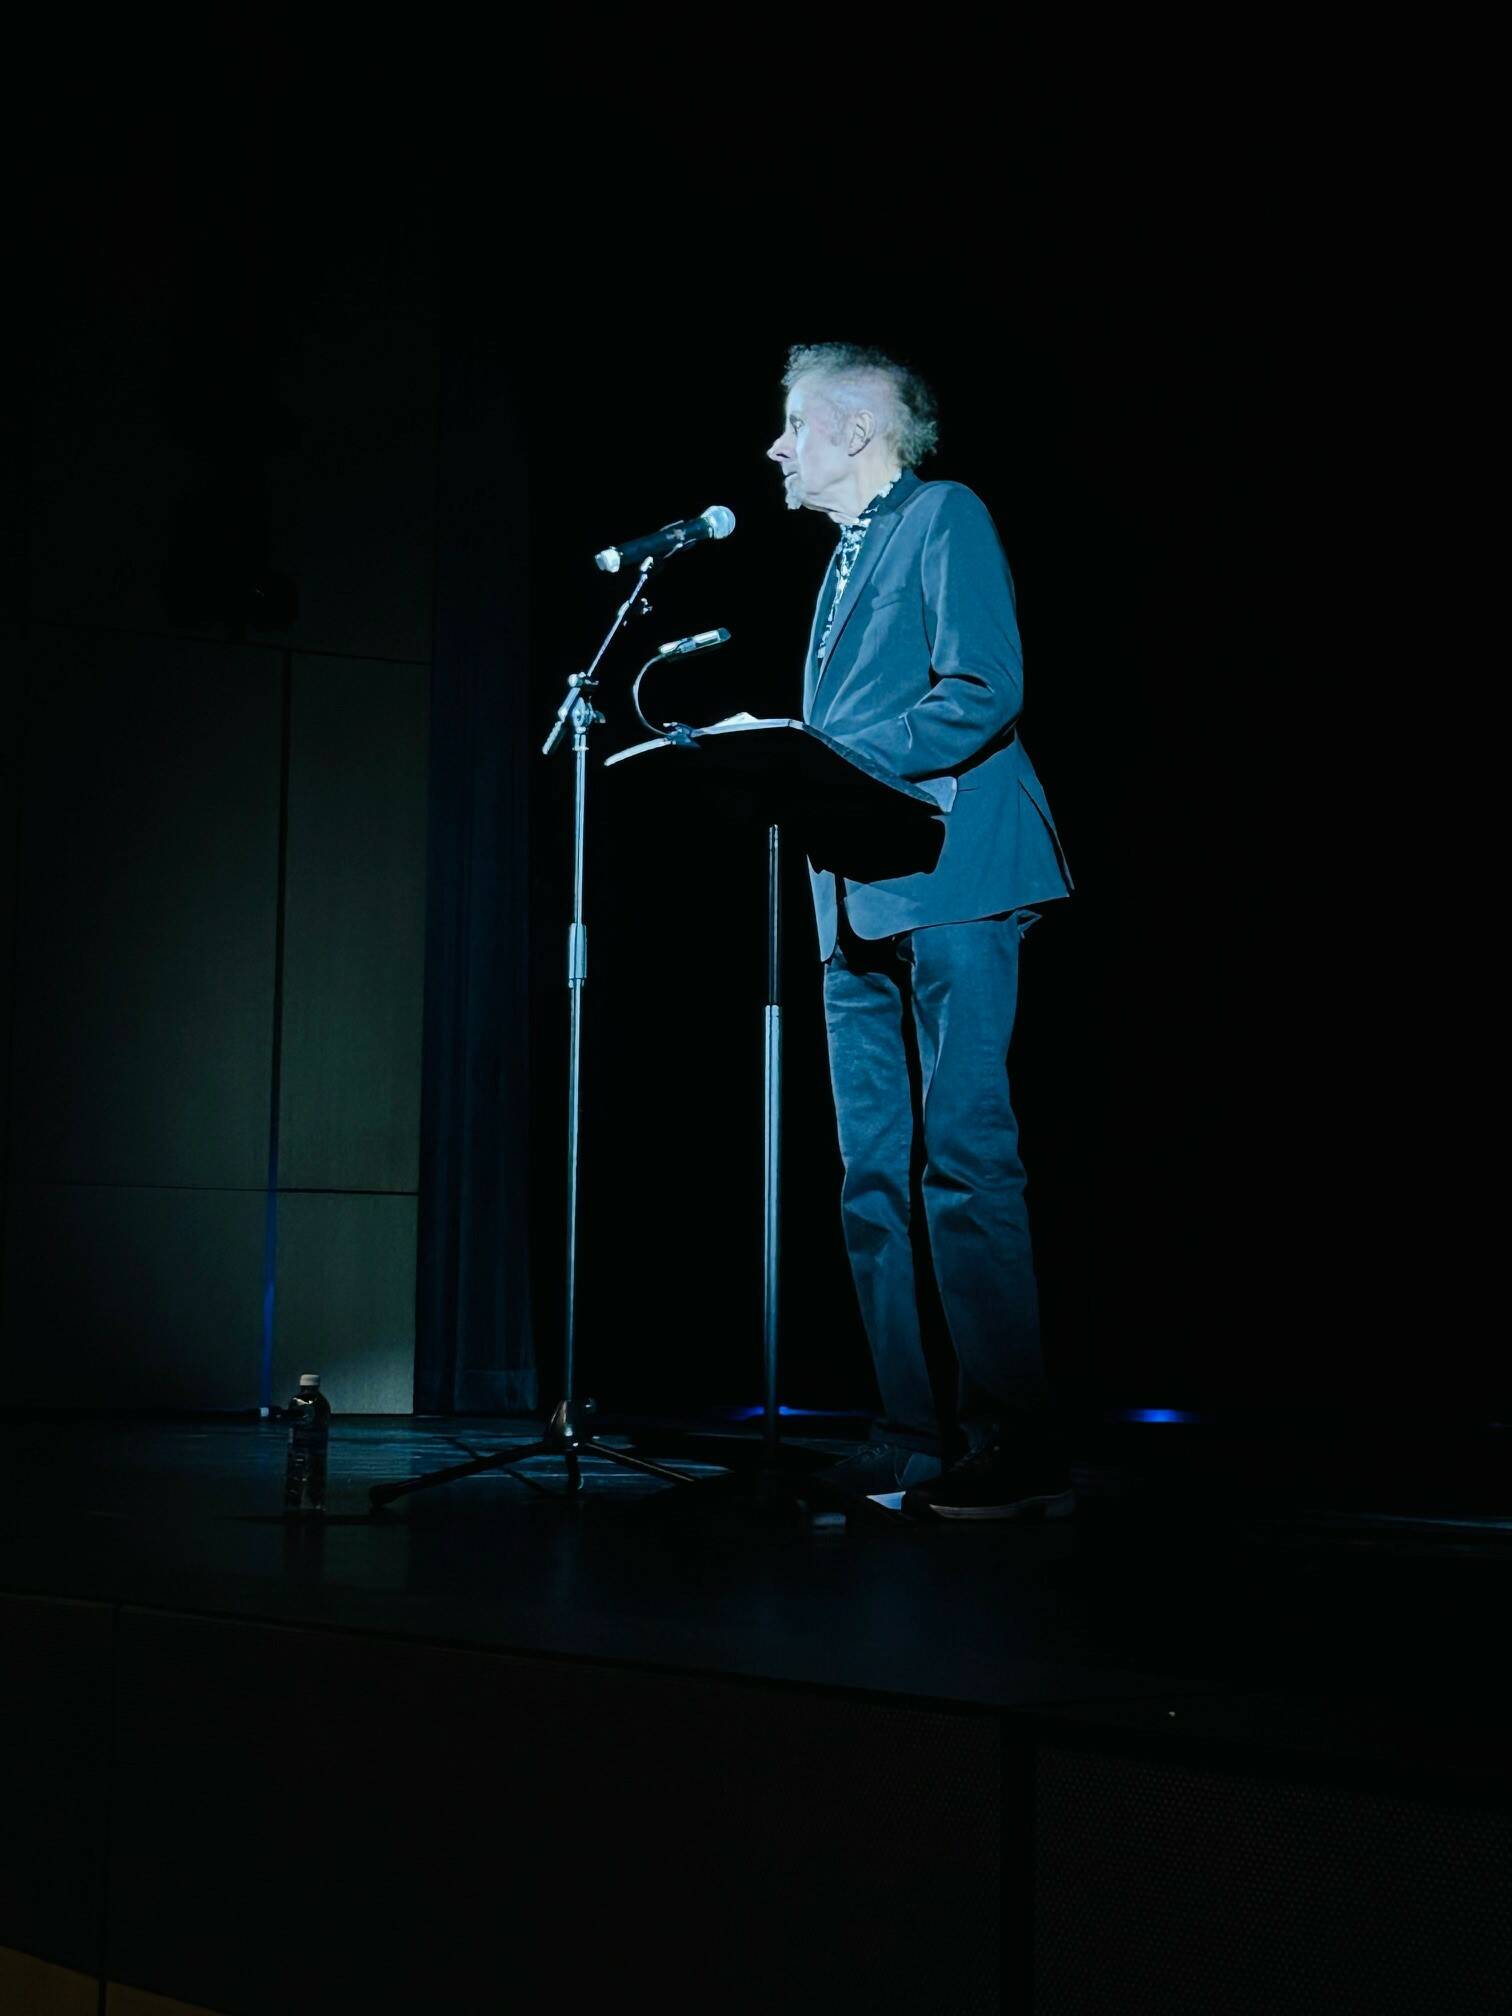 Photo by Kristy Webster / TC Boyle reads short stories at The Field Arts & Events Hall in Port Angeles on April 25.